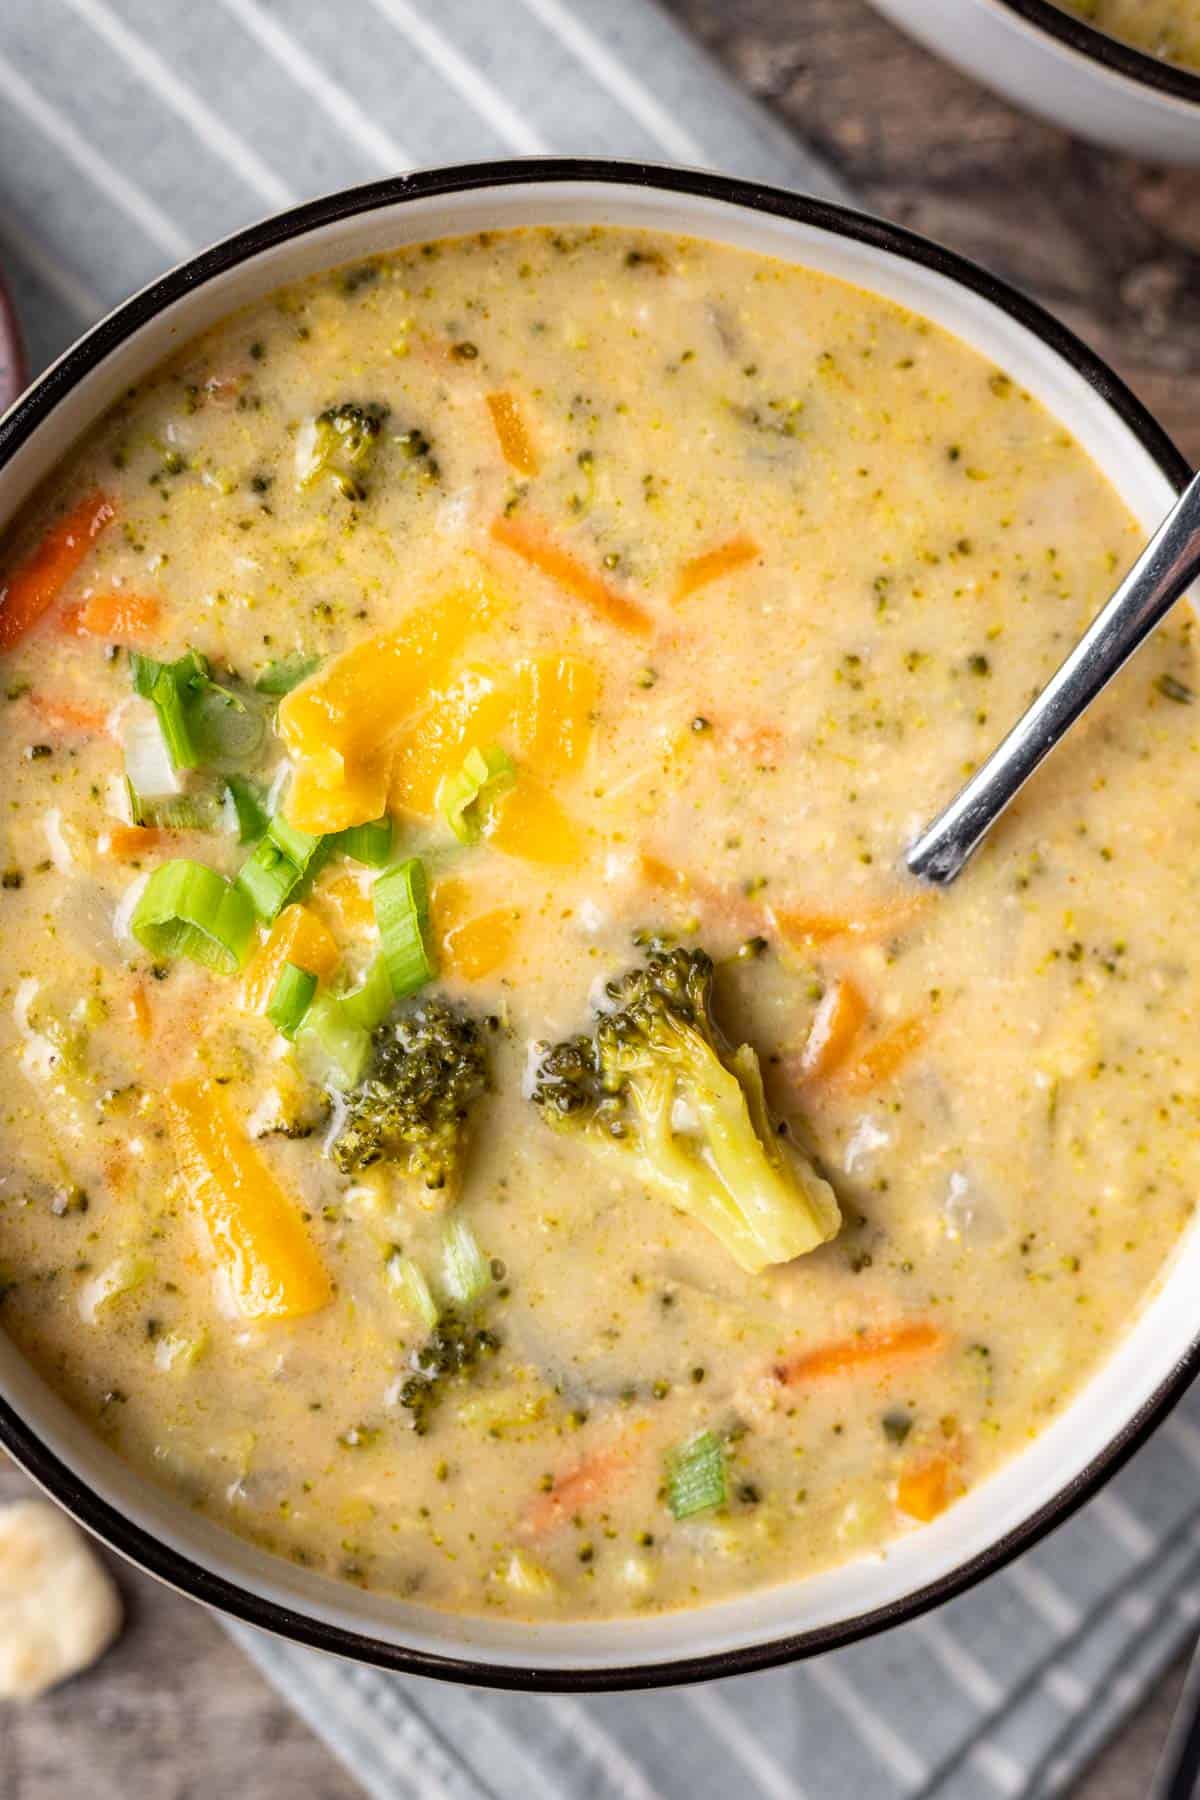 Creamy broccoli cheddar soup in a bowl with a spoon showing a piece of broccoli.